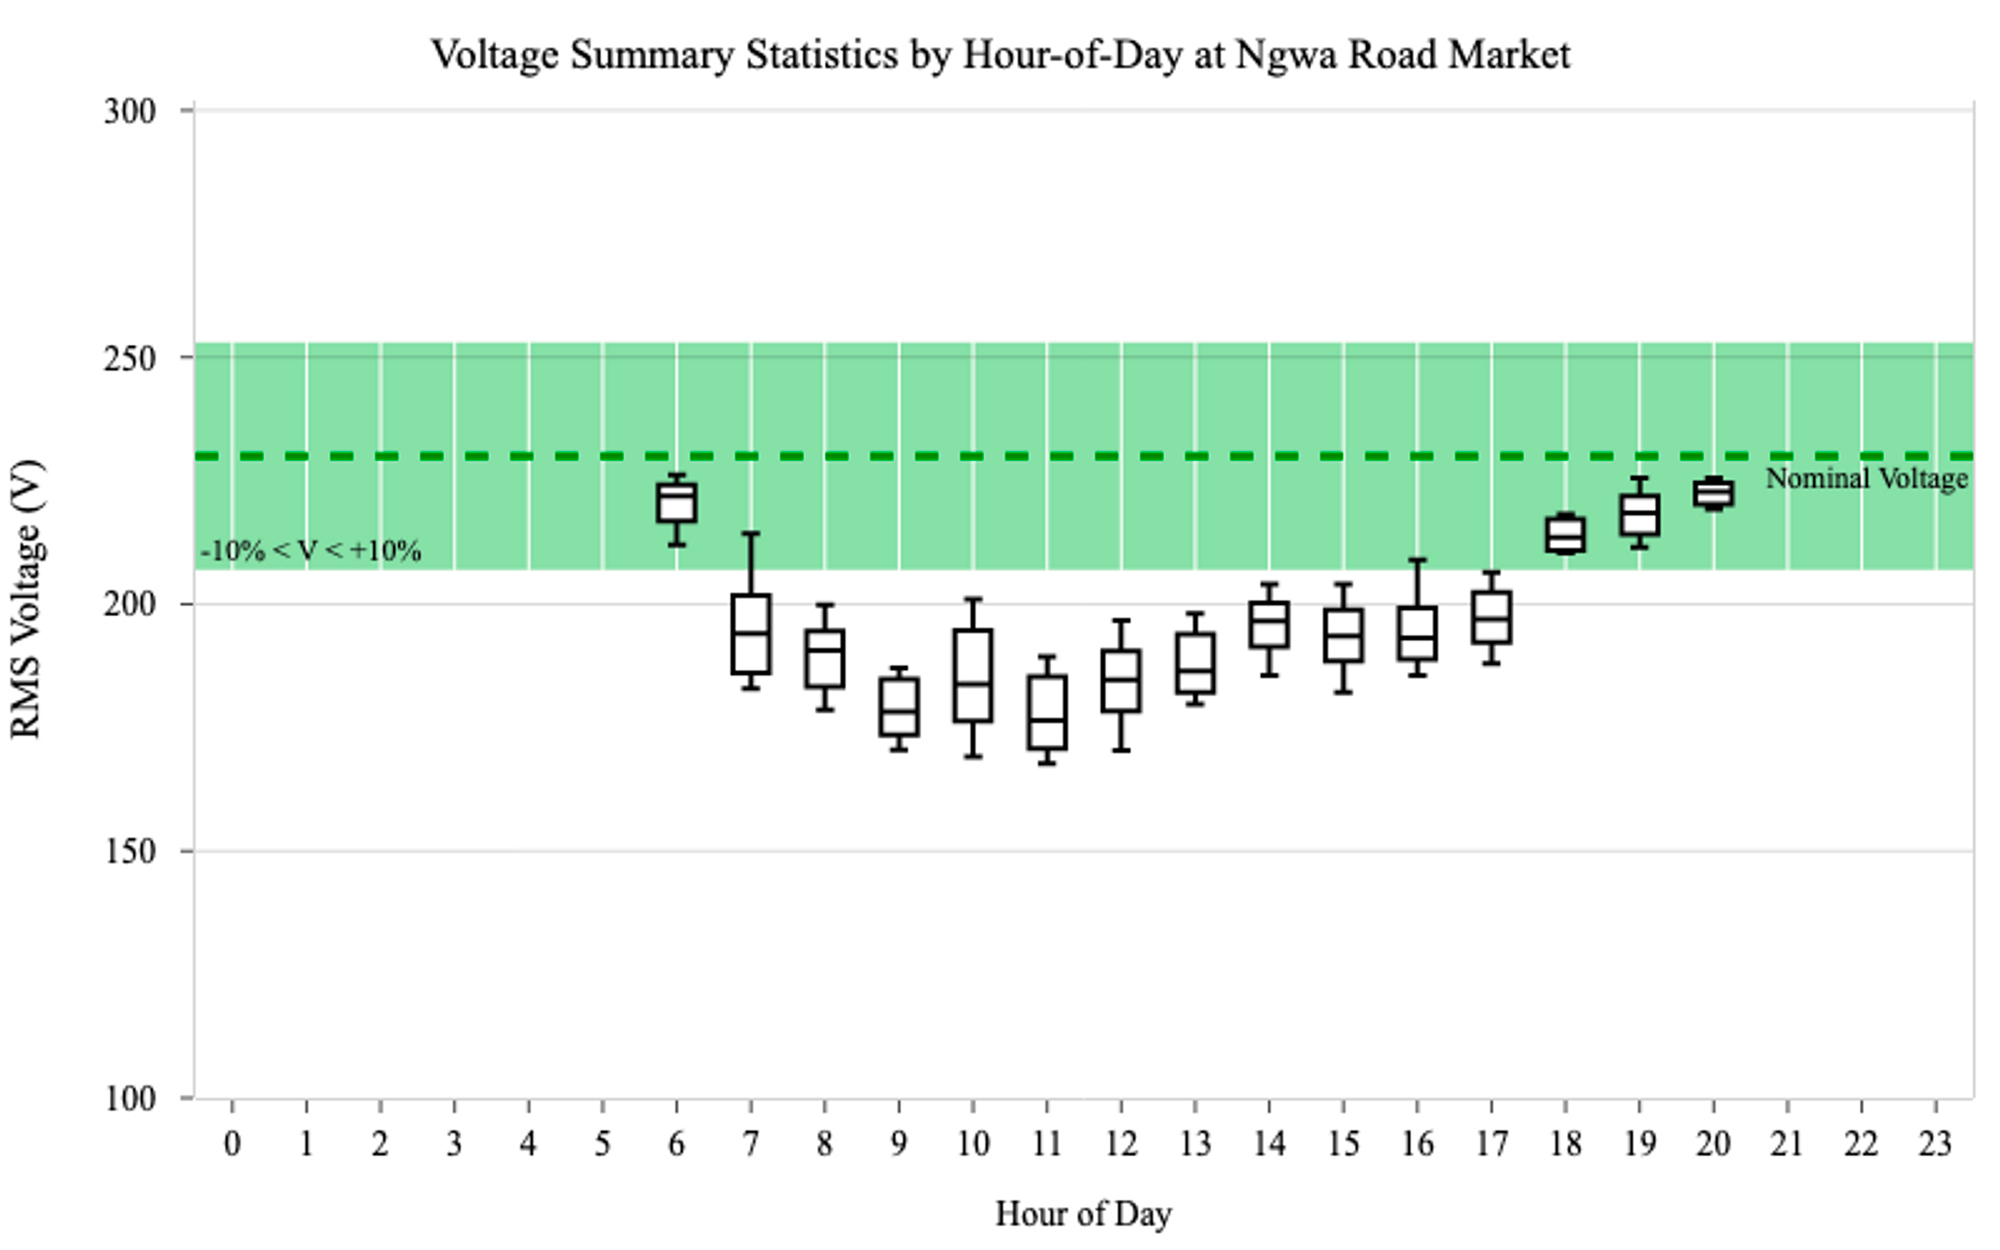 Figure 10: Voltage distribution by hour-of-day at Ngwa Road Market. The green area represents the recommended voltage tolerance window of ±10% of the nominal voltage of 230V. Voltage readings are persistently low during business hours. Throughout the one-week monitoring period, four of the five sensors reported outages (0V) during non-business hours, hence the missing voltage data from ~8:00 pm - 6:00 am. 